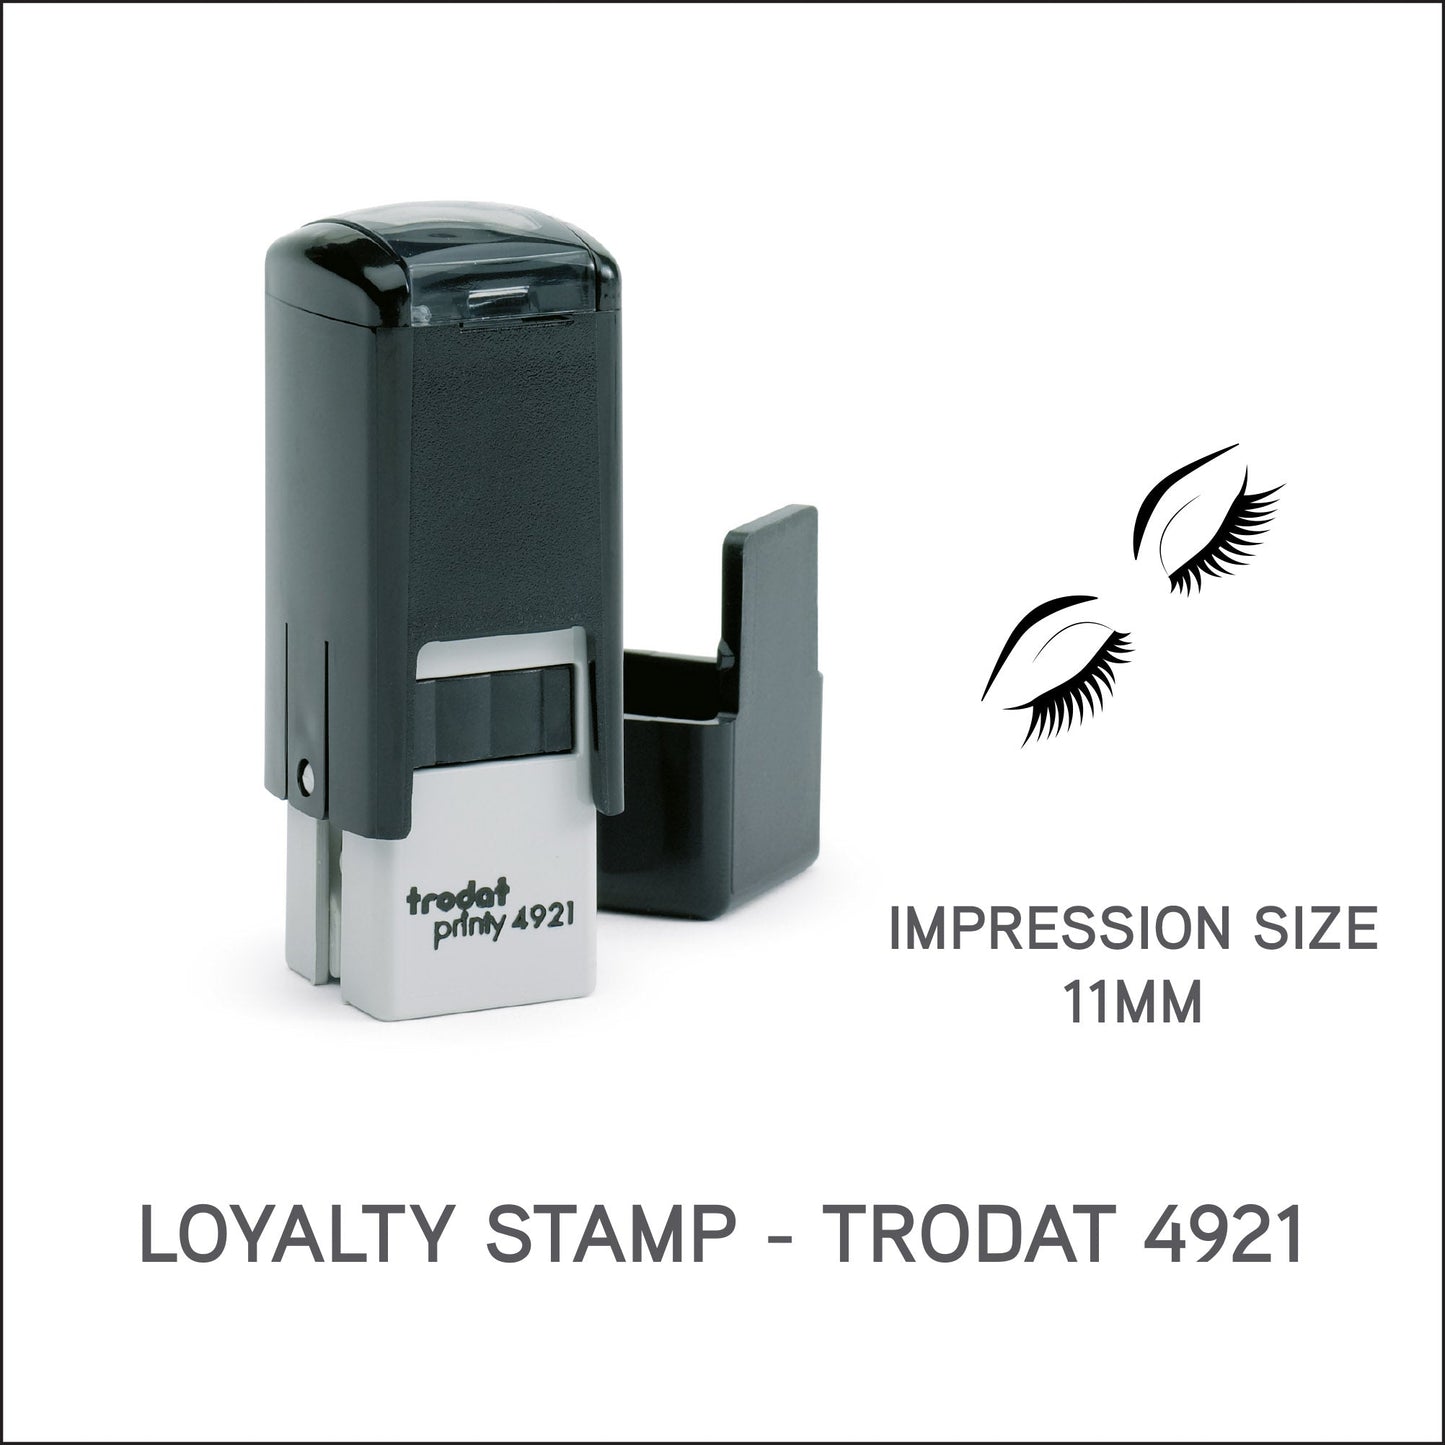 Lashes And Brows - Loyalty Card Rubber Stamp - Trodat 4921 - 11mm x 11mm Impression